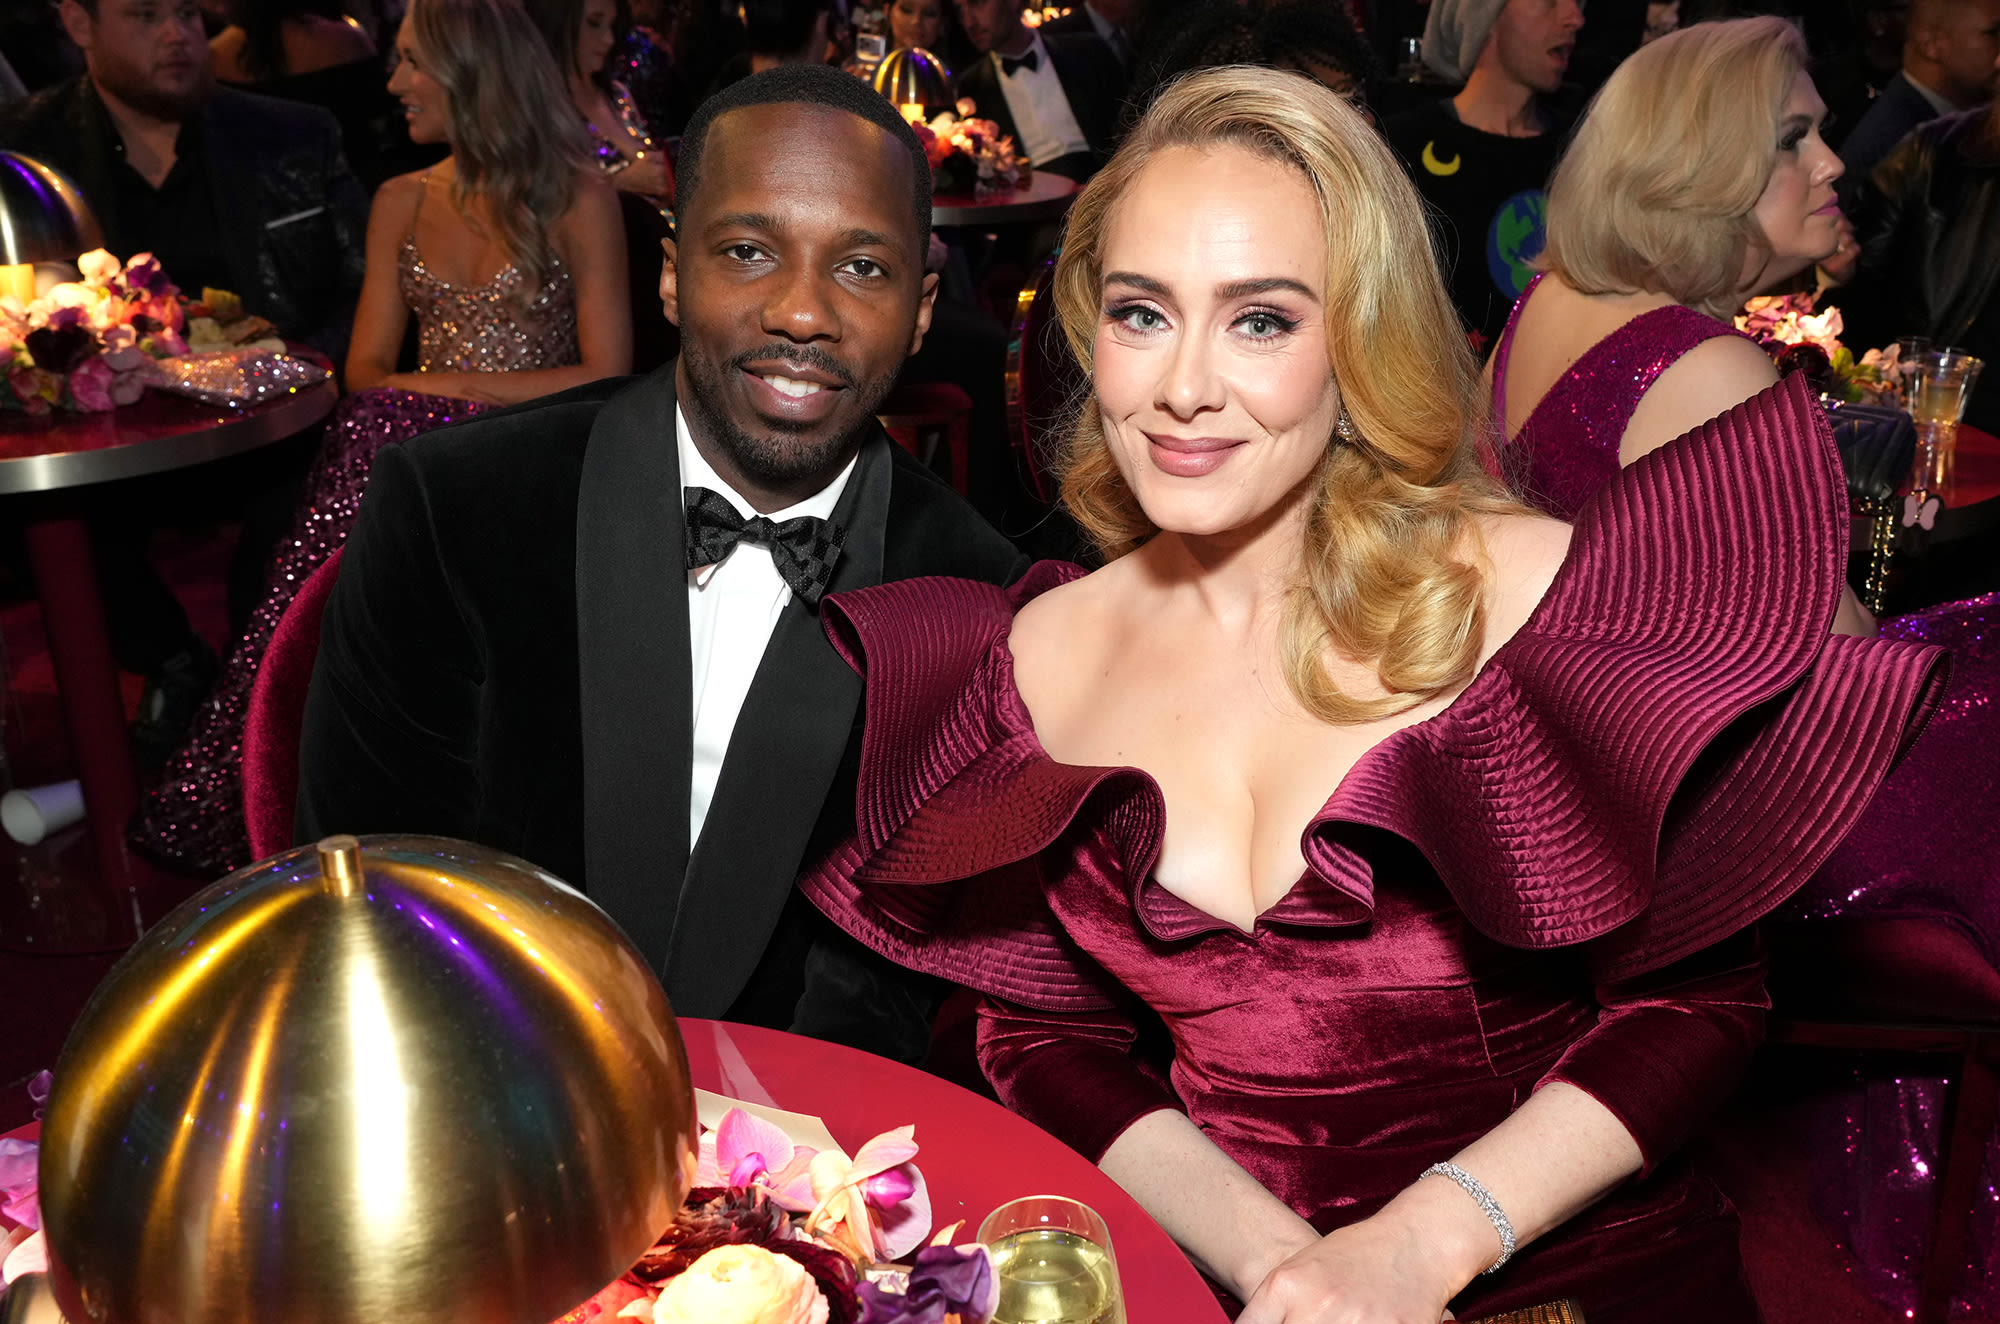 Adele Gives Rich Paul’s Daughter a Shout-Out for Graduation: ‘I Love You Darling’